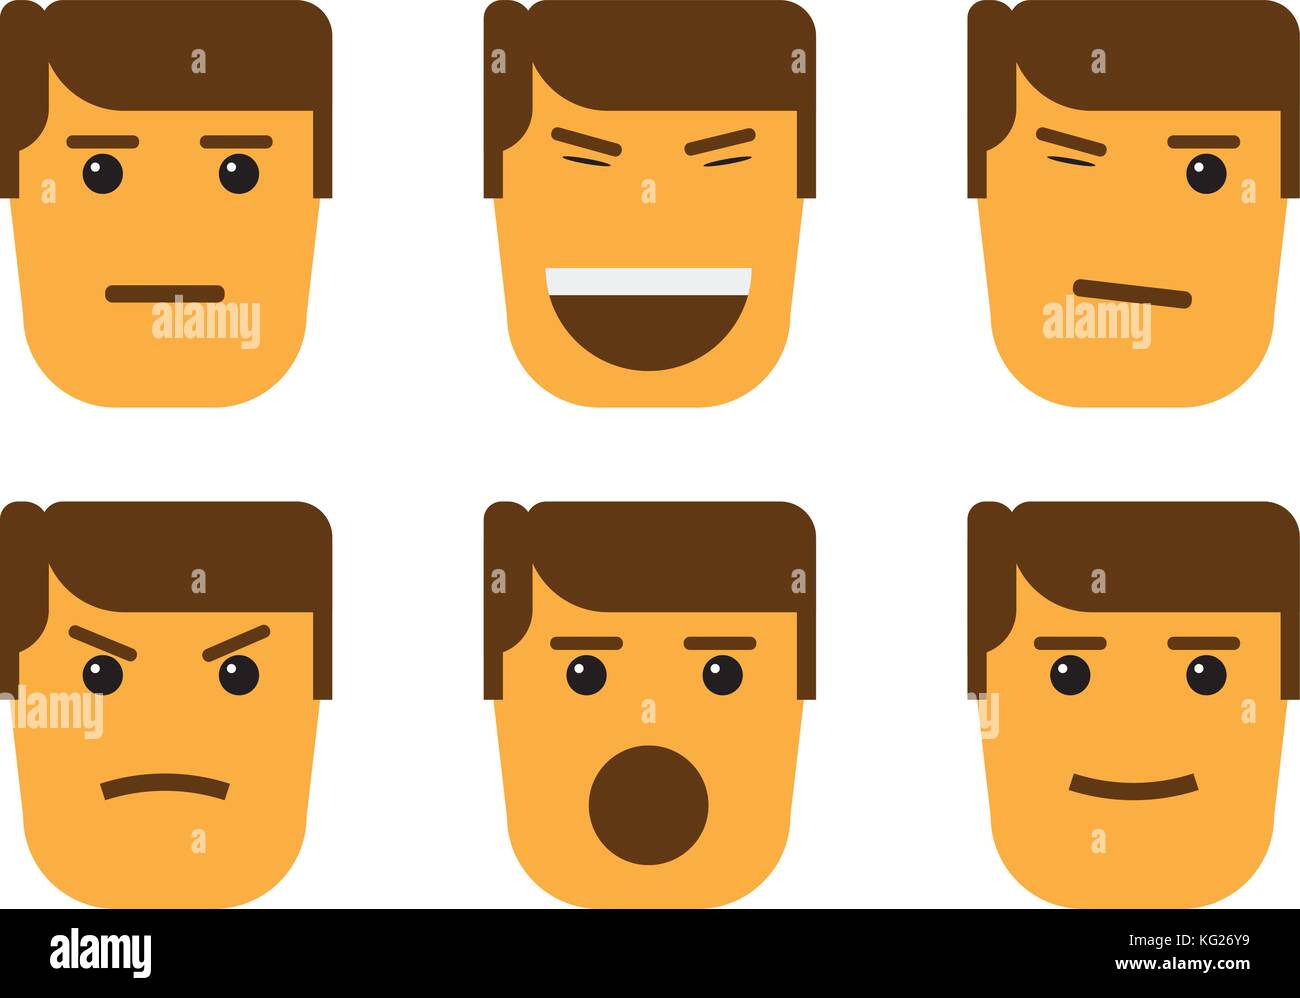 Set of cartoon face emotions with minimalism style. Stock Vector